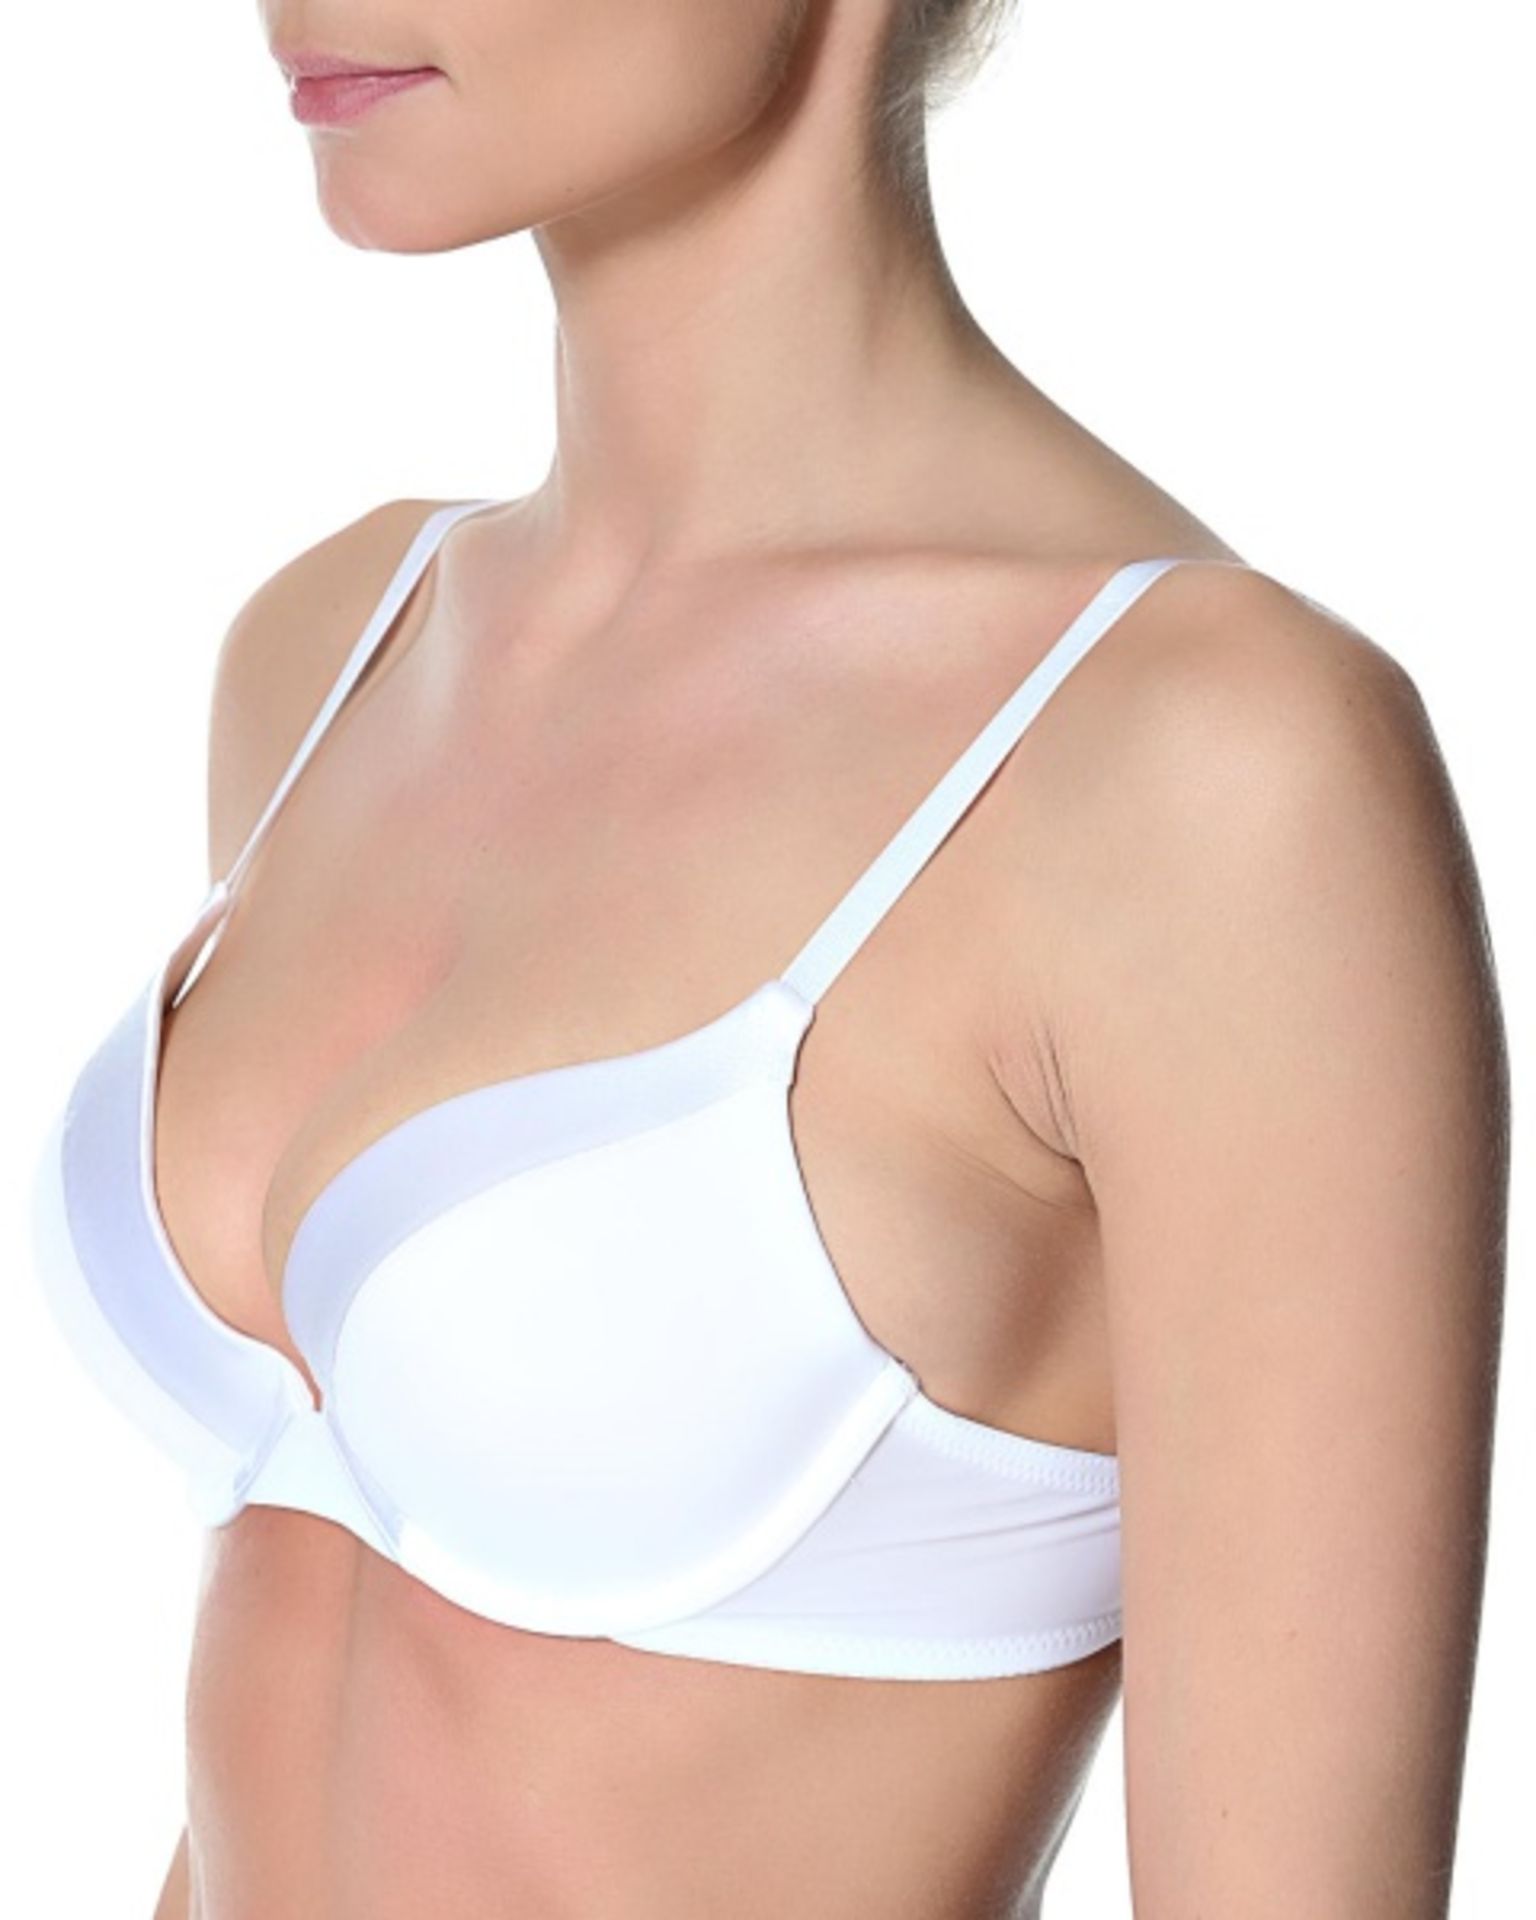 V  Grade A Maidenform Sweet Nothings 36C Push-up white bra with white trim X  2  Bid price to be